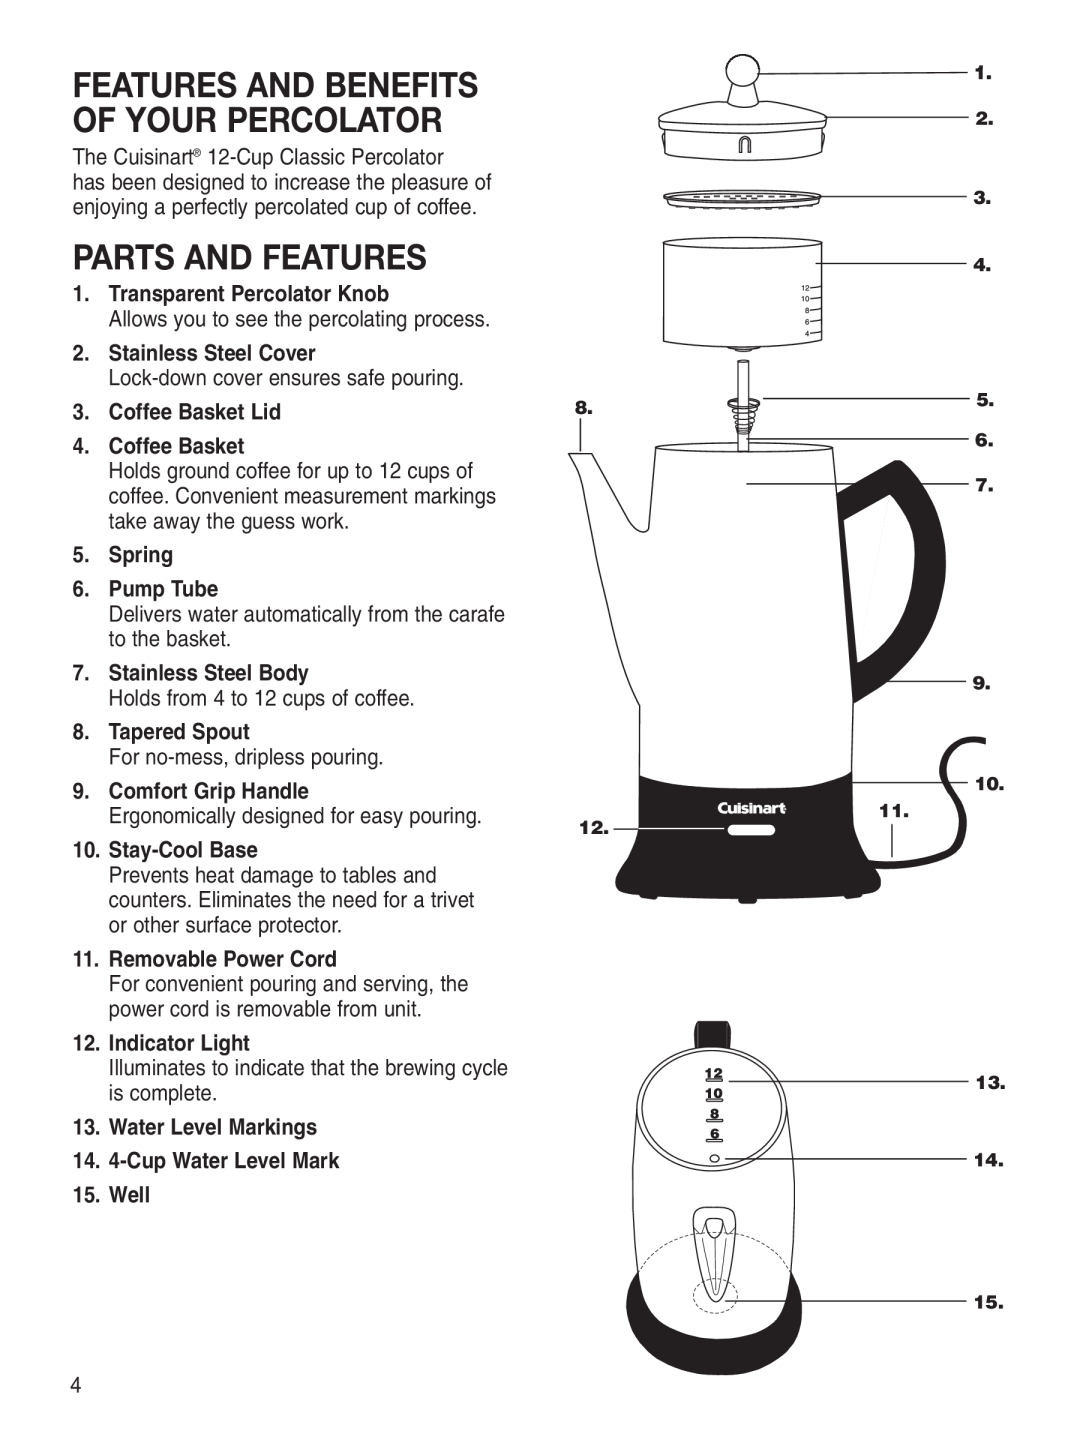 Cuisinart PRC-12 Series manual Parts And Features, Features And Benefits Of Your Percolator, Transparent Percolator Knob 